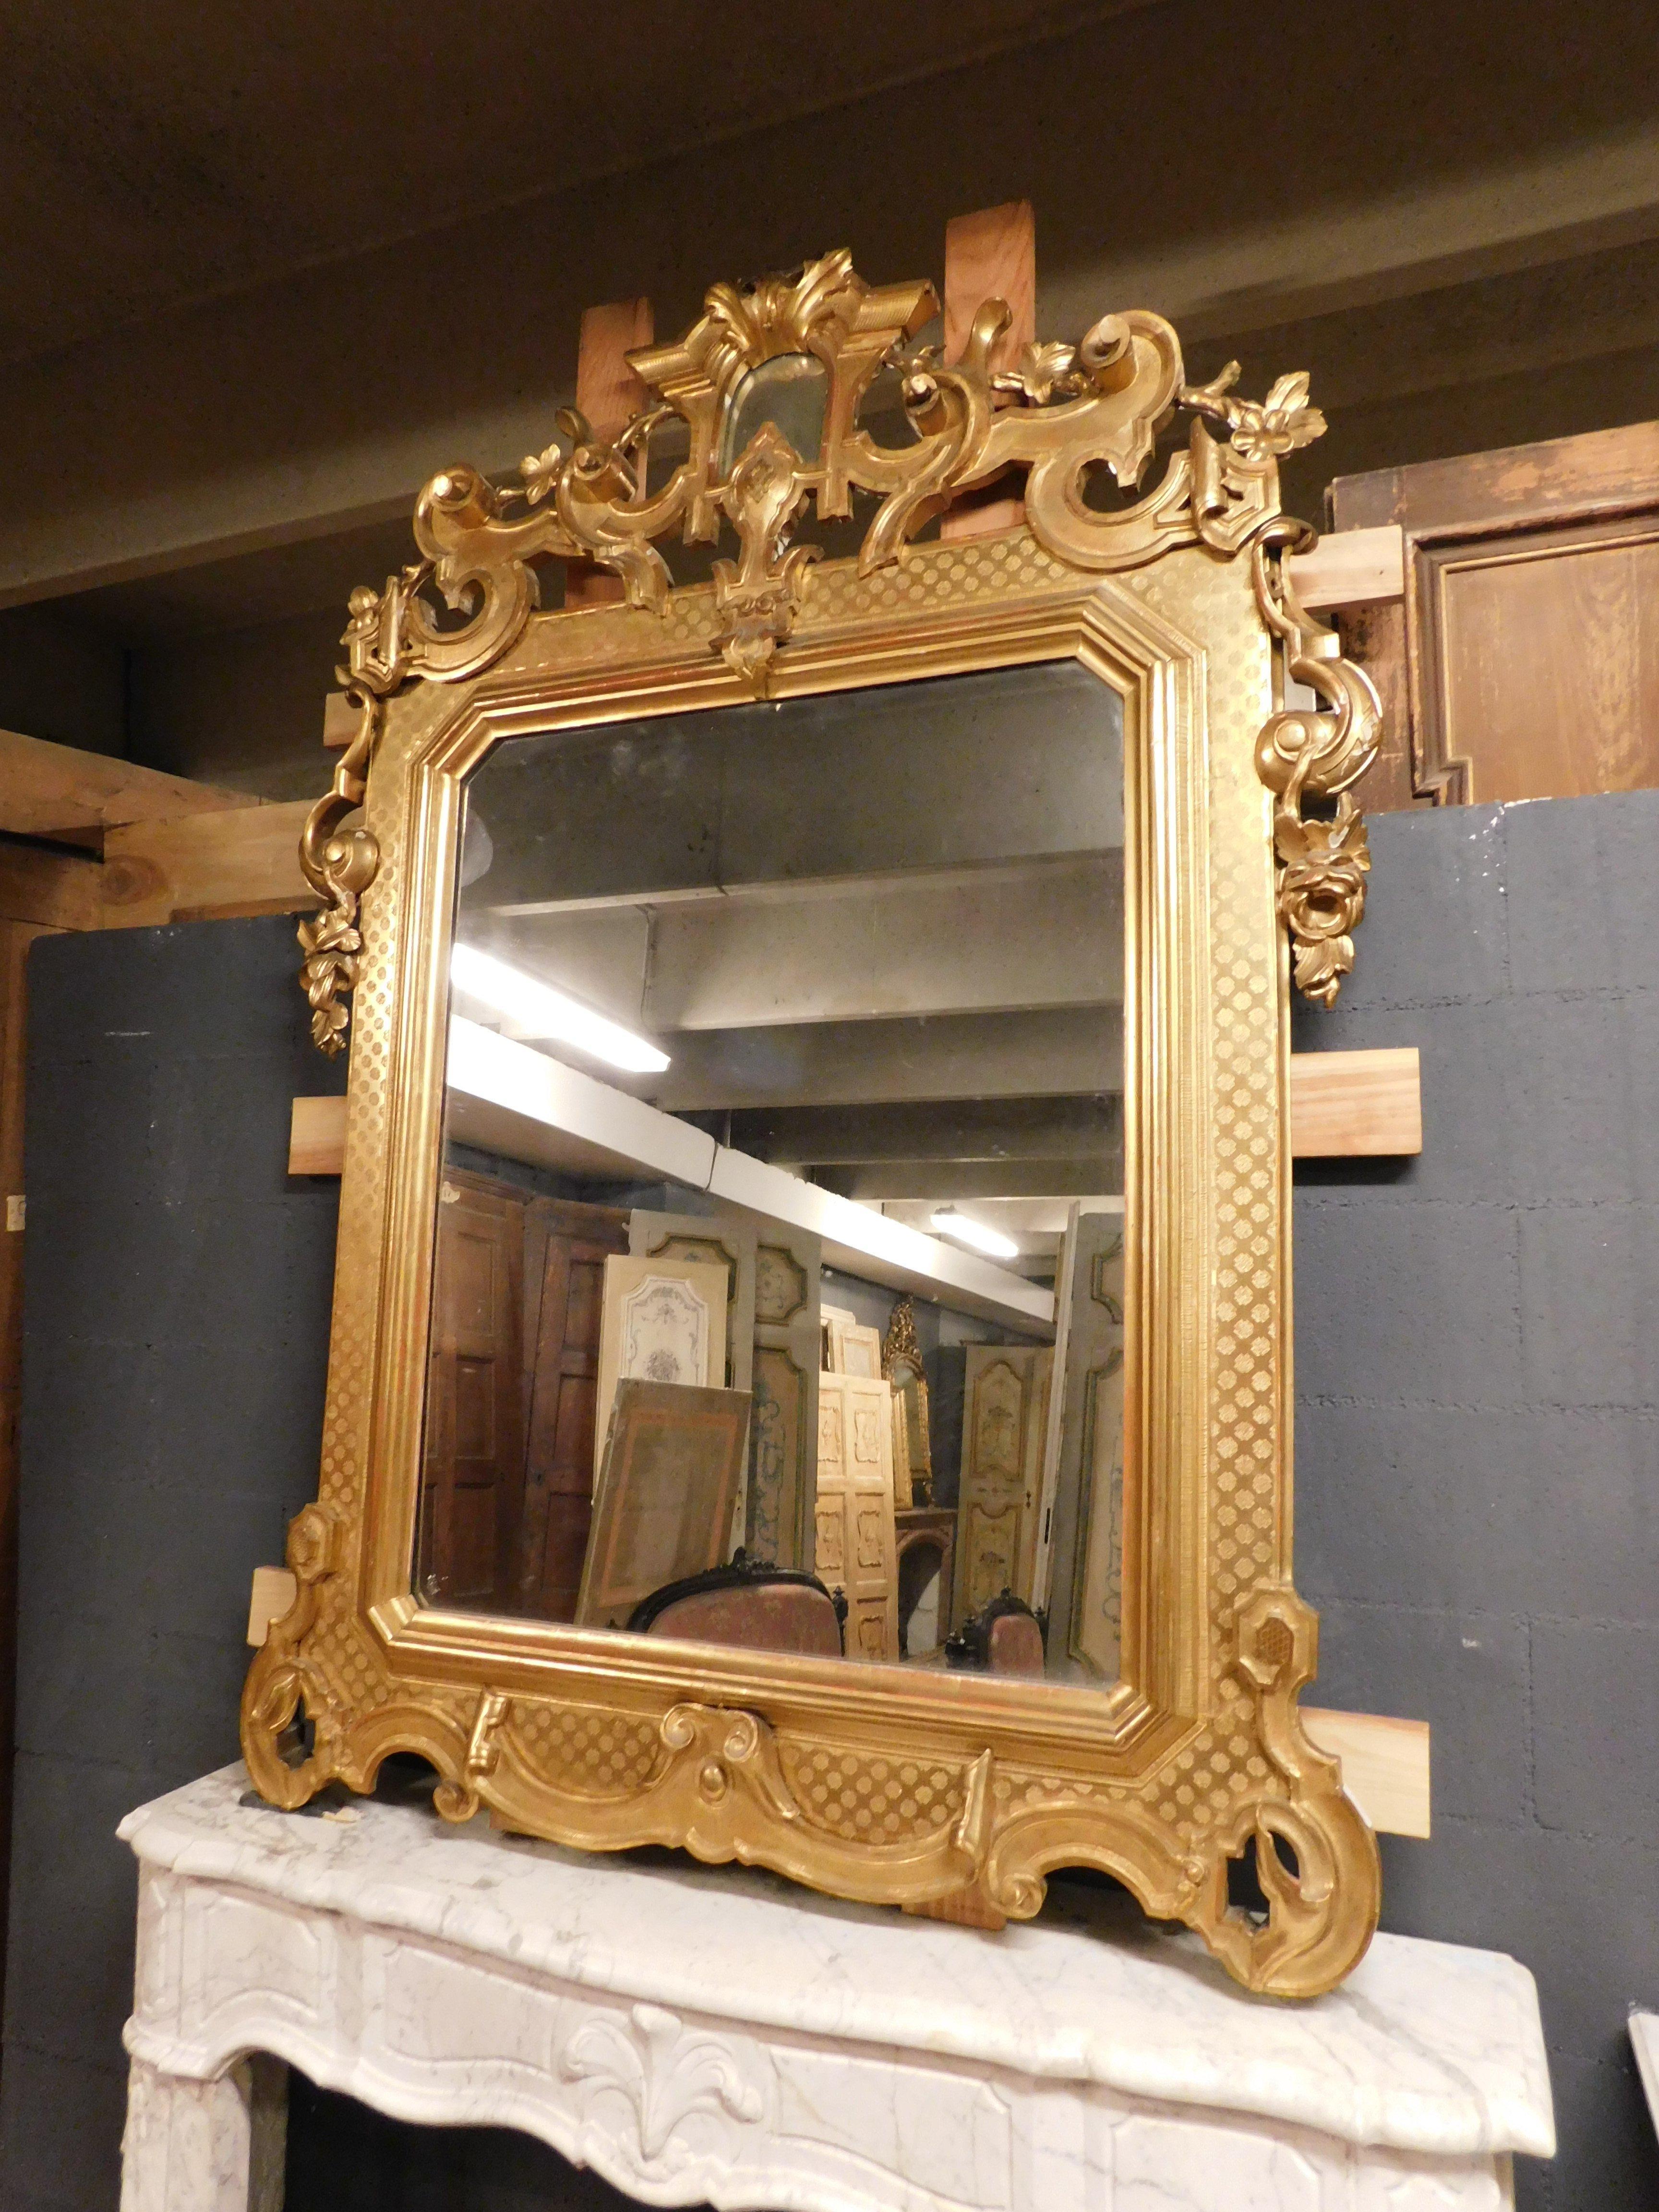 Ancient gilded and richly carved mirror, with decorated cymatium and frame carved in low relief, very elegant and refined, built to rest over a fireplace in the late 1800s in Italy.
External maximum size cm W 135 x H 186.